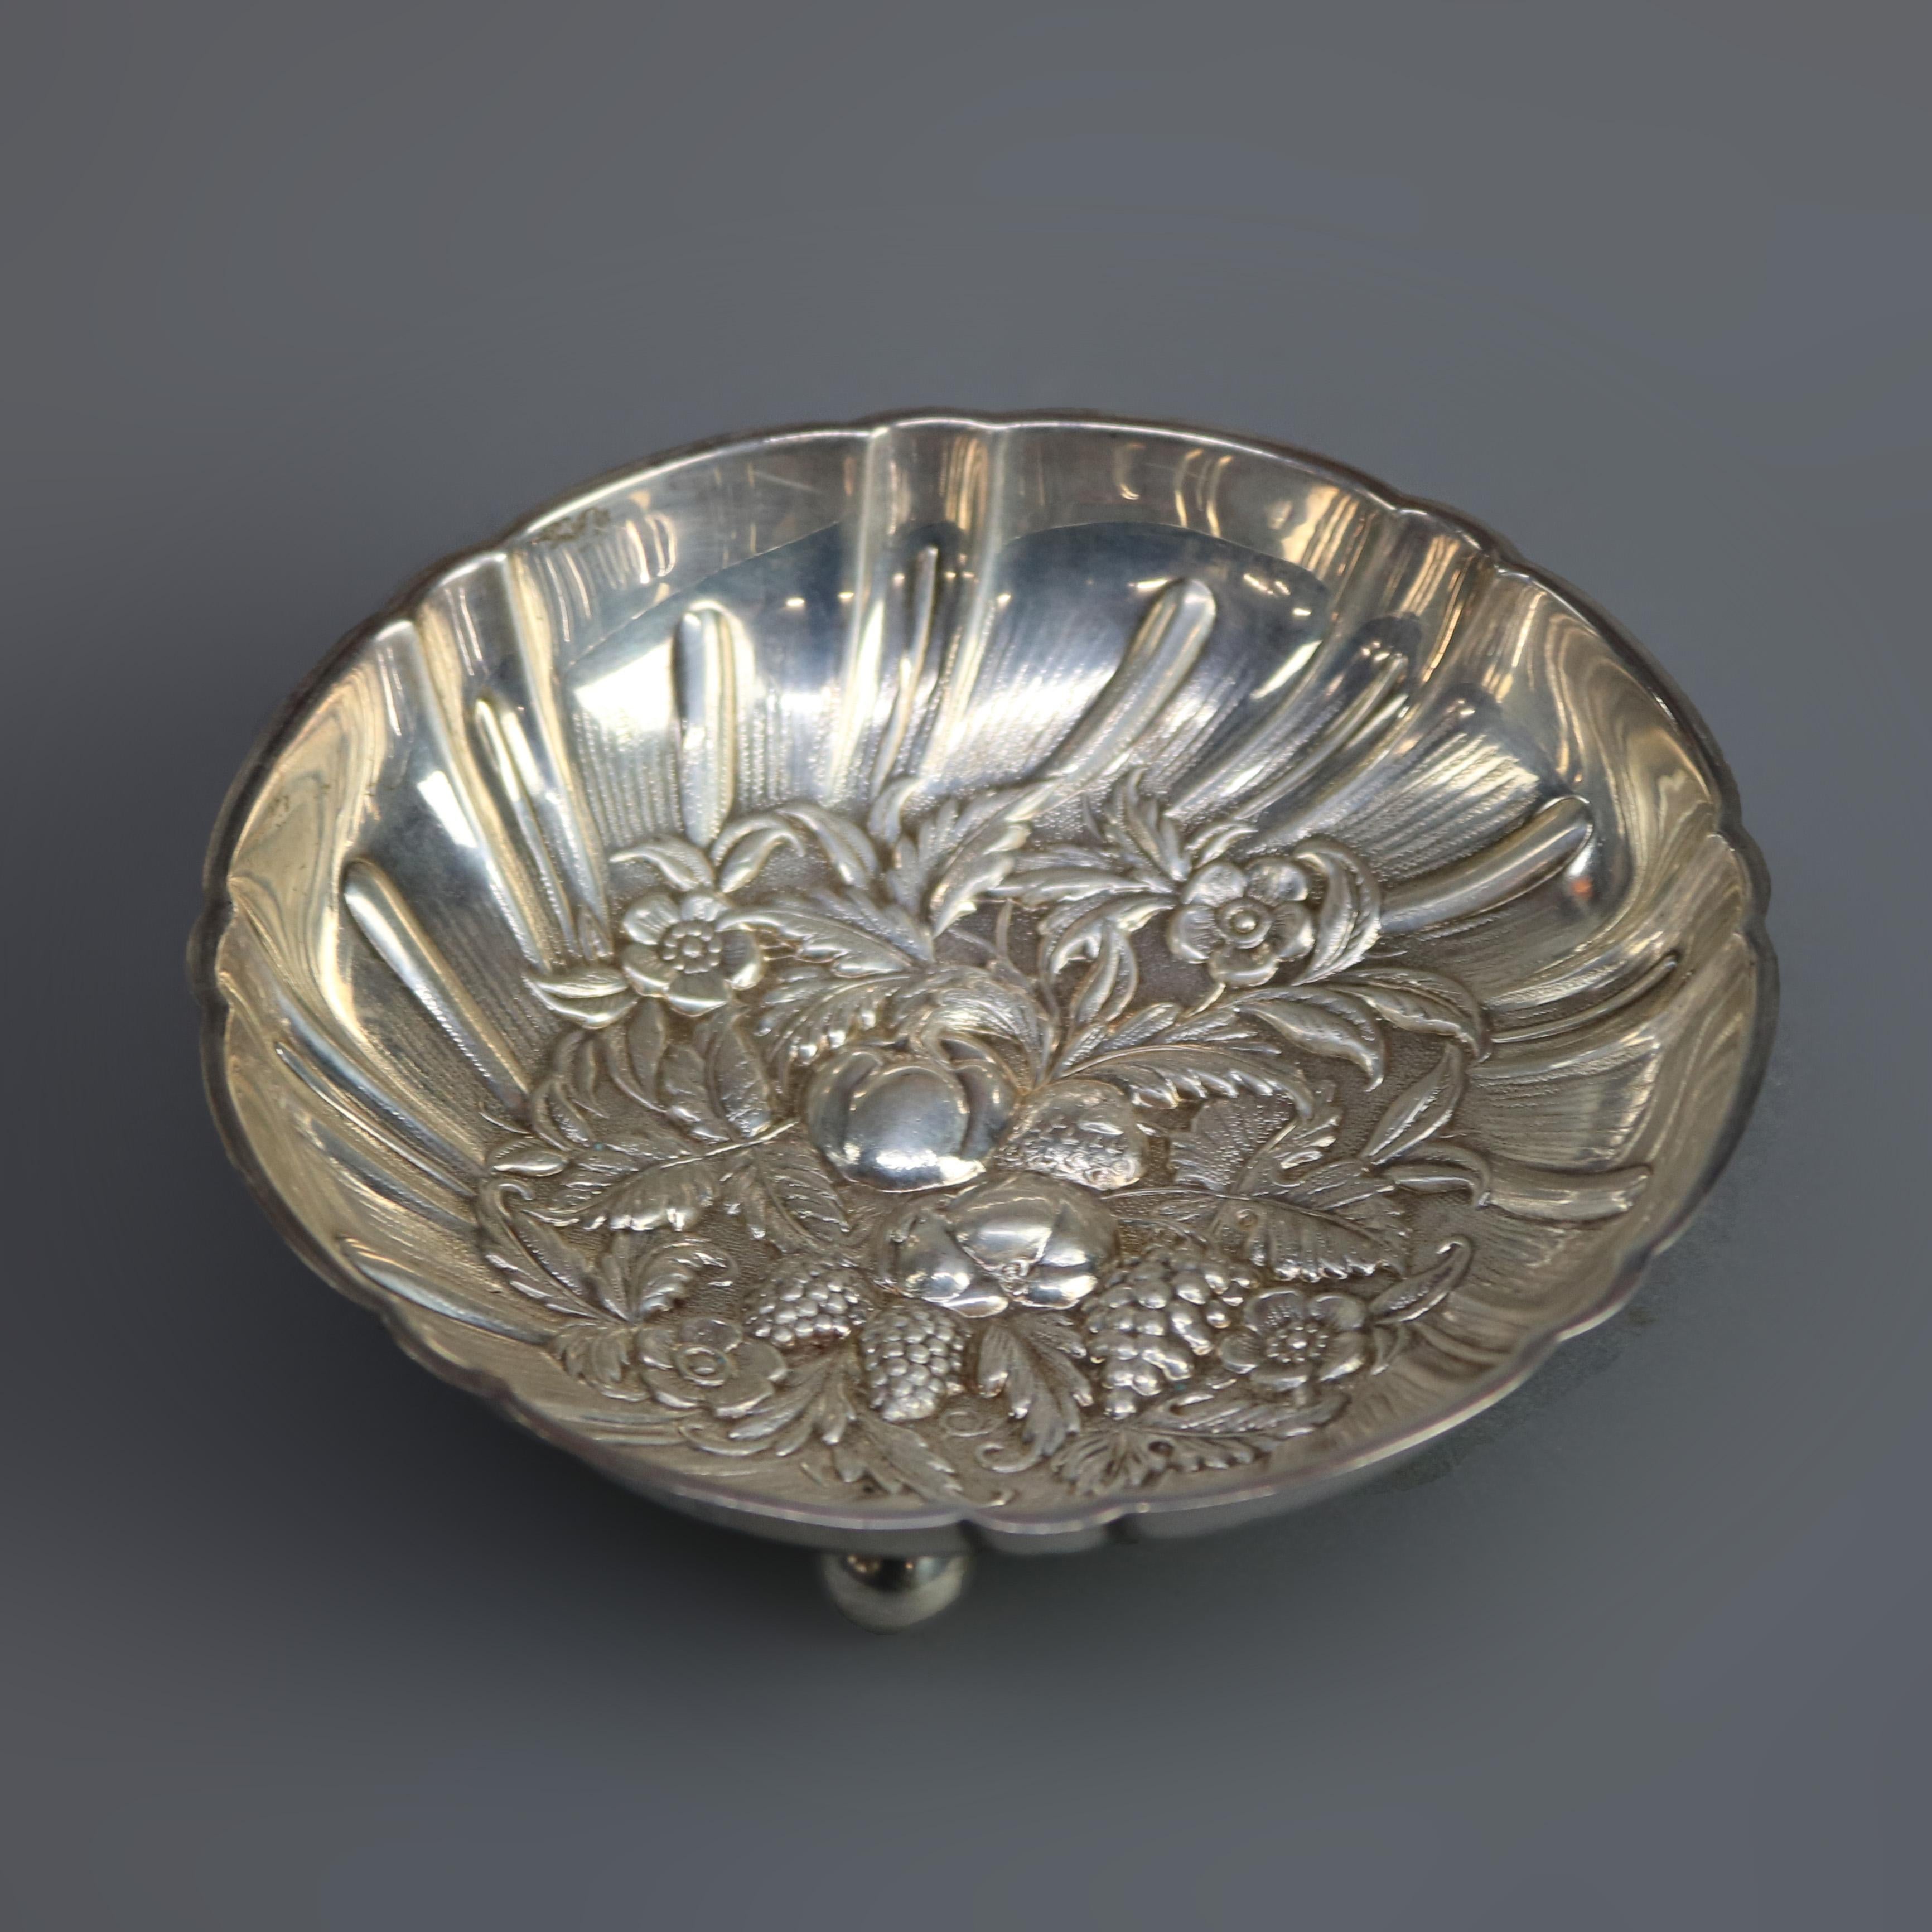 American Pair of Sterling Silver Kirk & Stieff Repousse Nut Bowls, circa 1900 6.7 toz